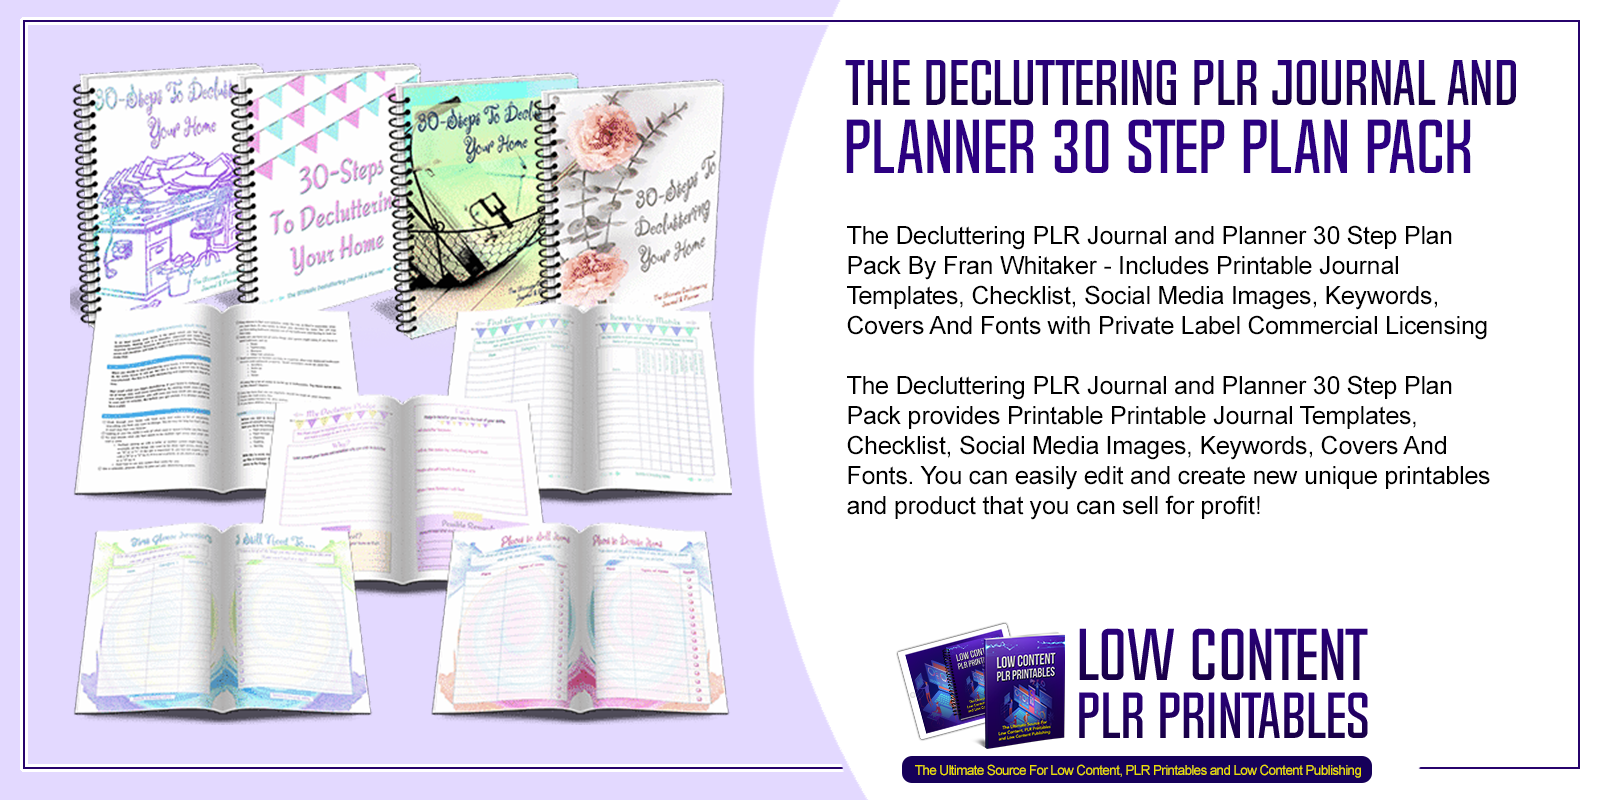 The Decluttering PLR Journal and Planner 30 Step Plan Pack